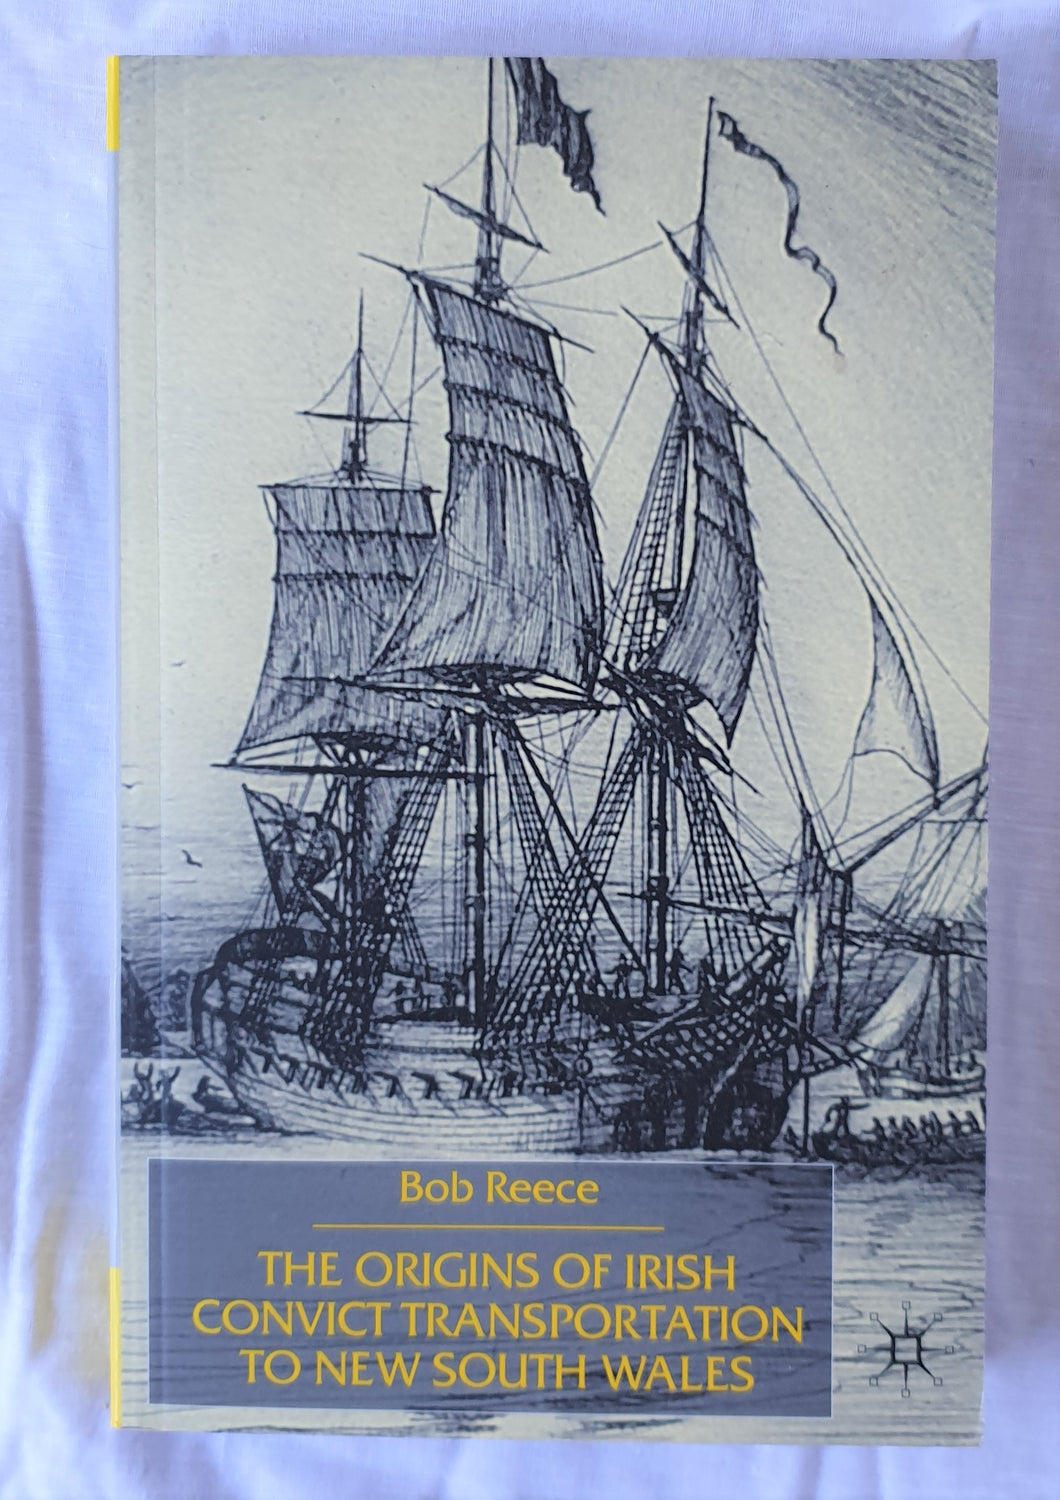 The Origins of Irish Convict Transportation to New South Wales by Bob Reece